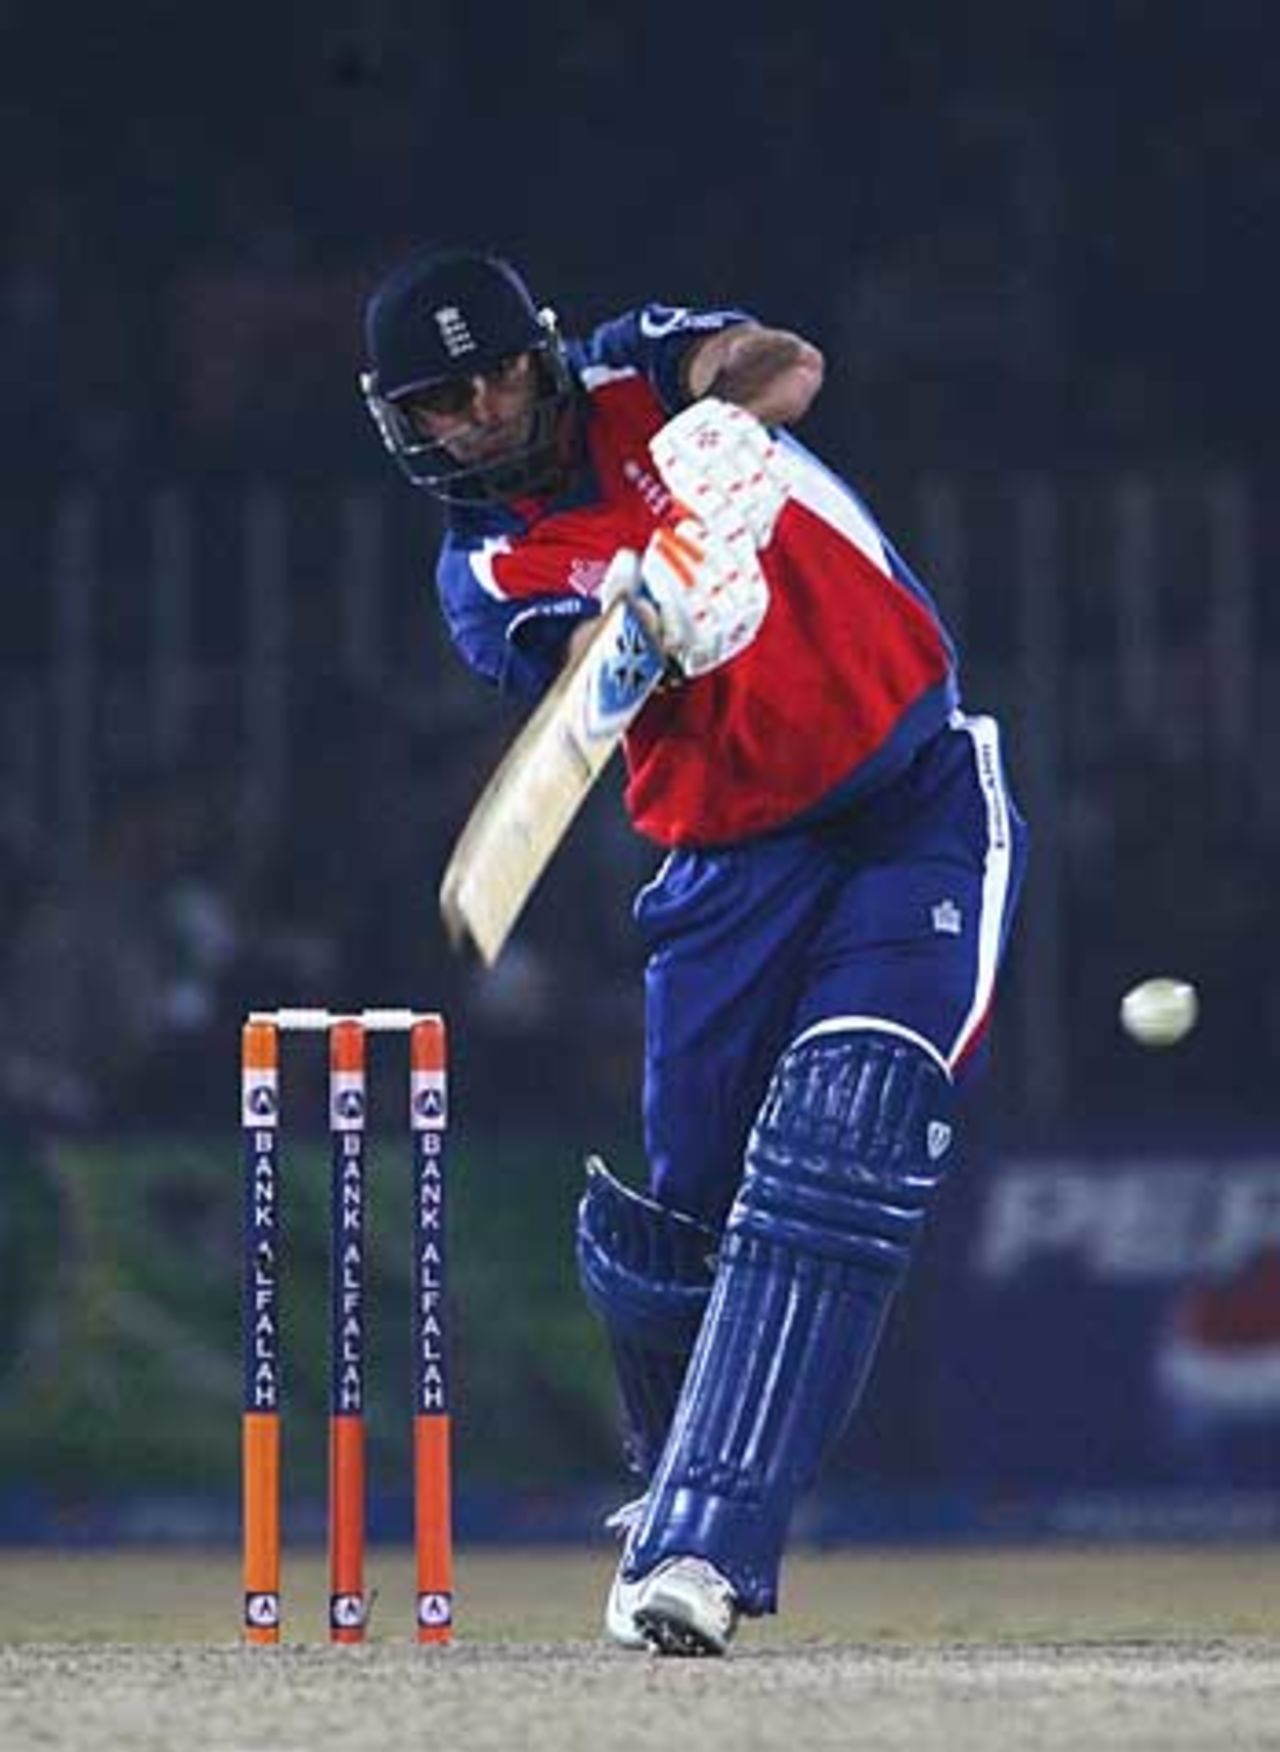 Kabir Ali gave England late hope with battling 39 but couldn't quite get them across the line, Pakistan v England, 4th ODI, Rawalpindi, December 19, 2005